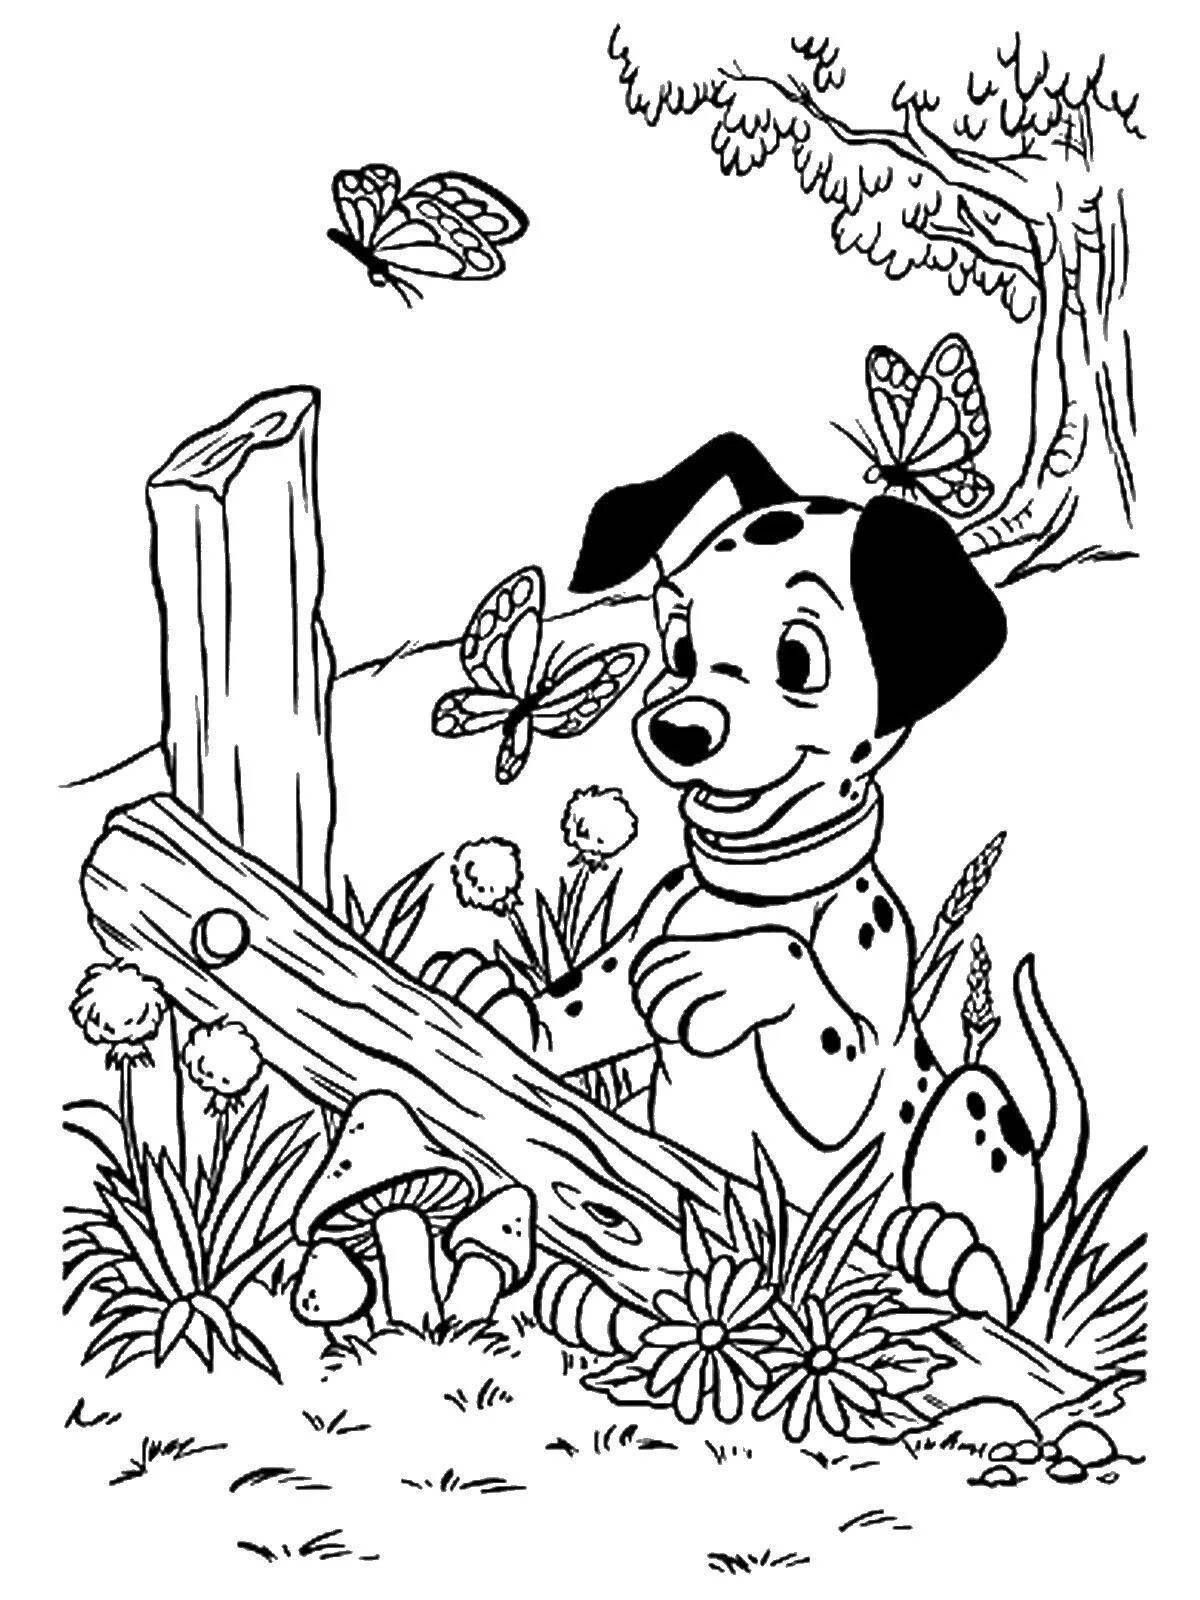 Charming coloring page 101